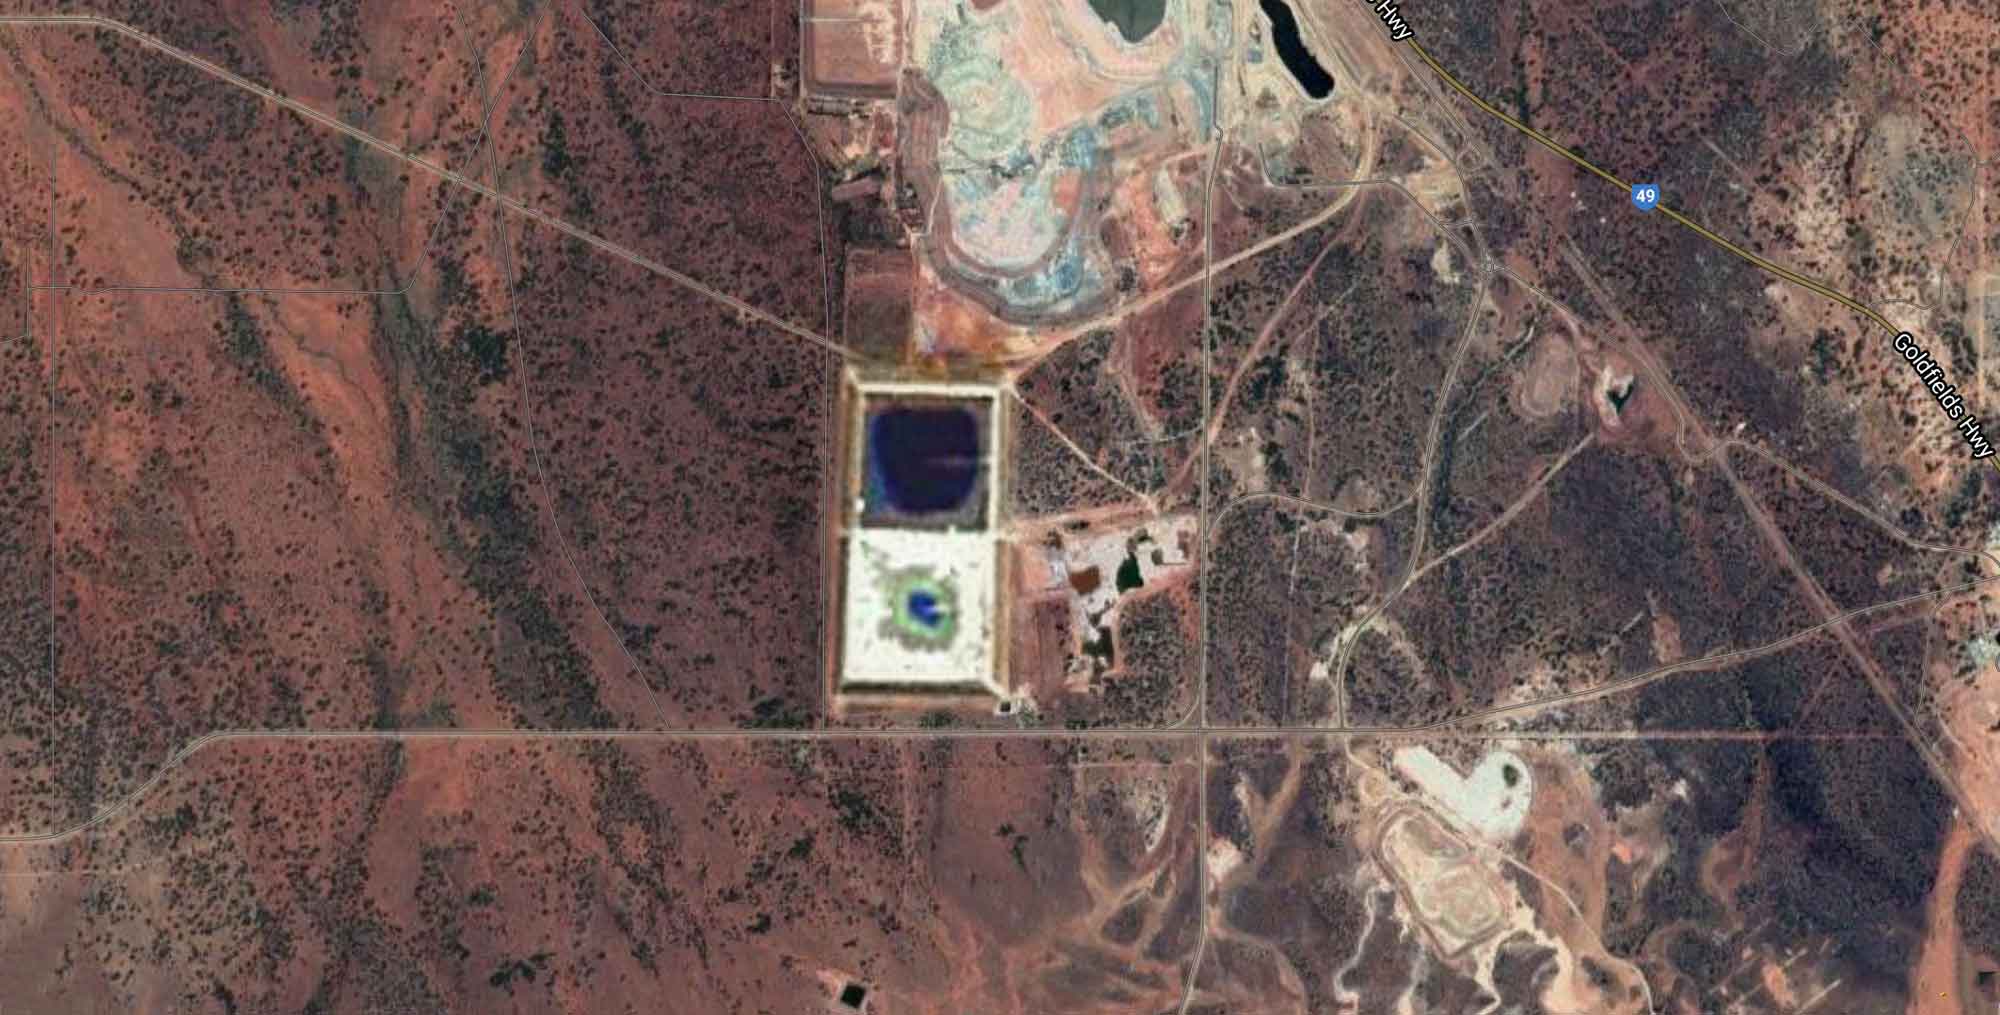 Google Earth Users Discover A Giant iPod In Australia